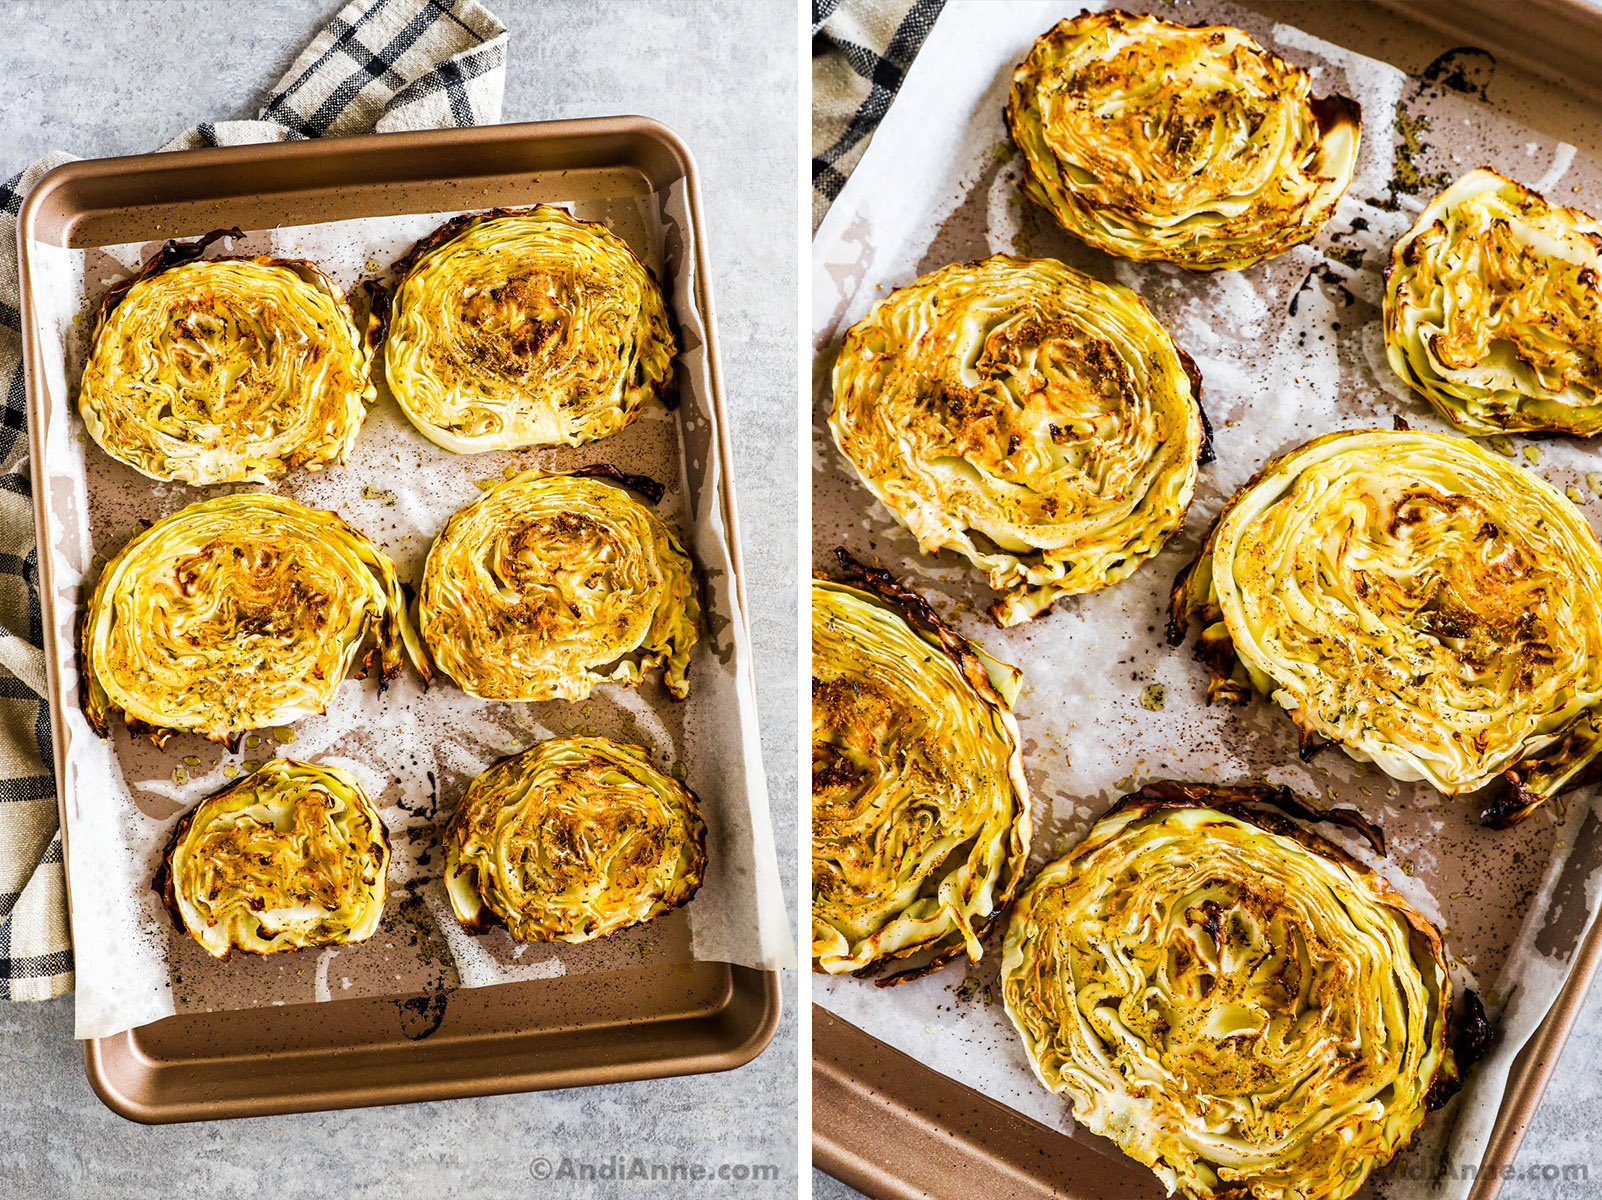 Baked cabbage steaks on a baking sheet.